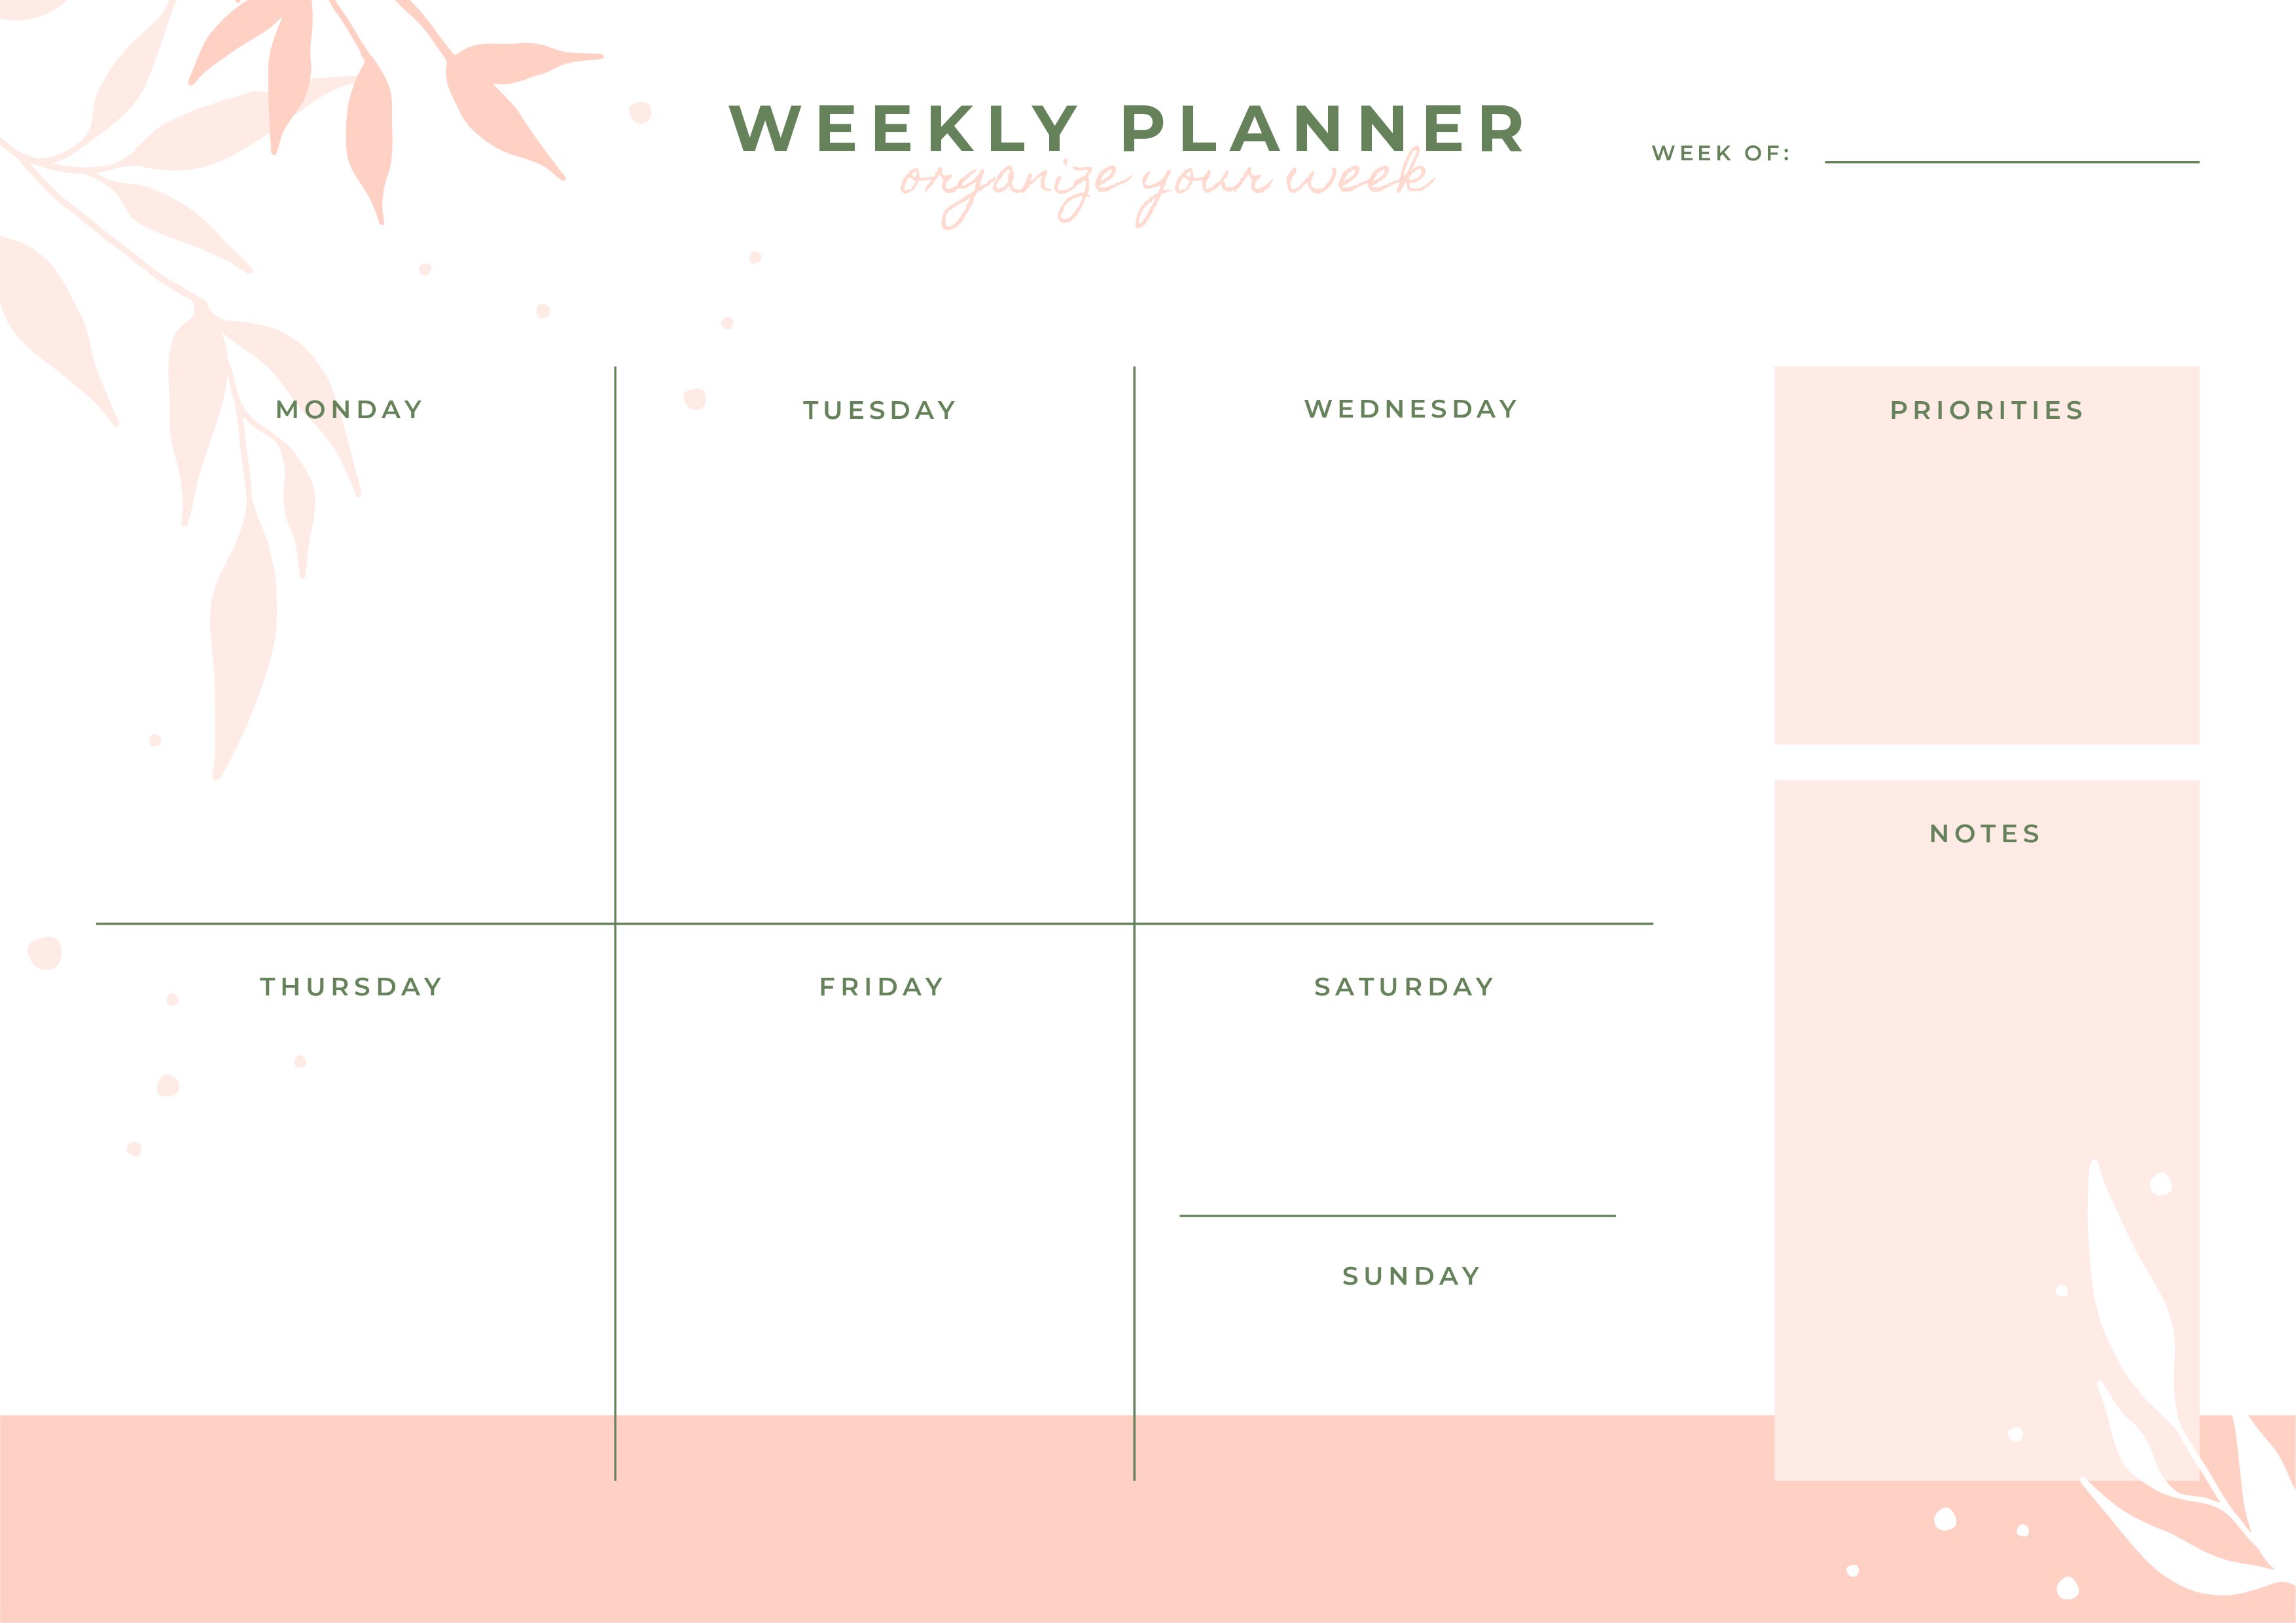 Plan your whole week with our collection of weekly schedule planner templates you can personalize in minutes.